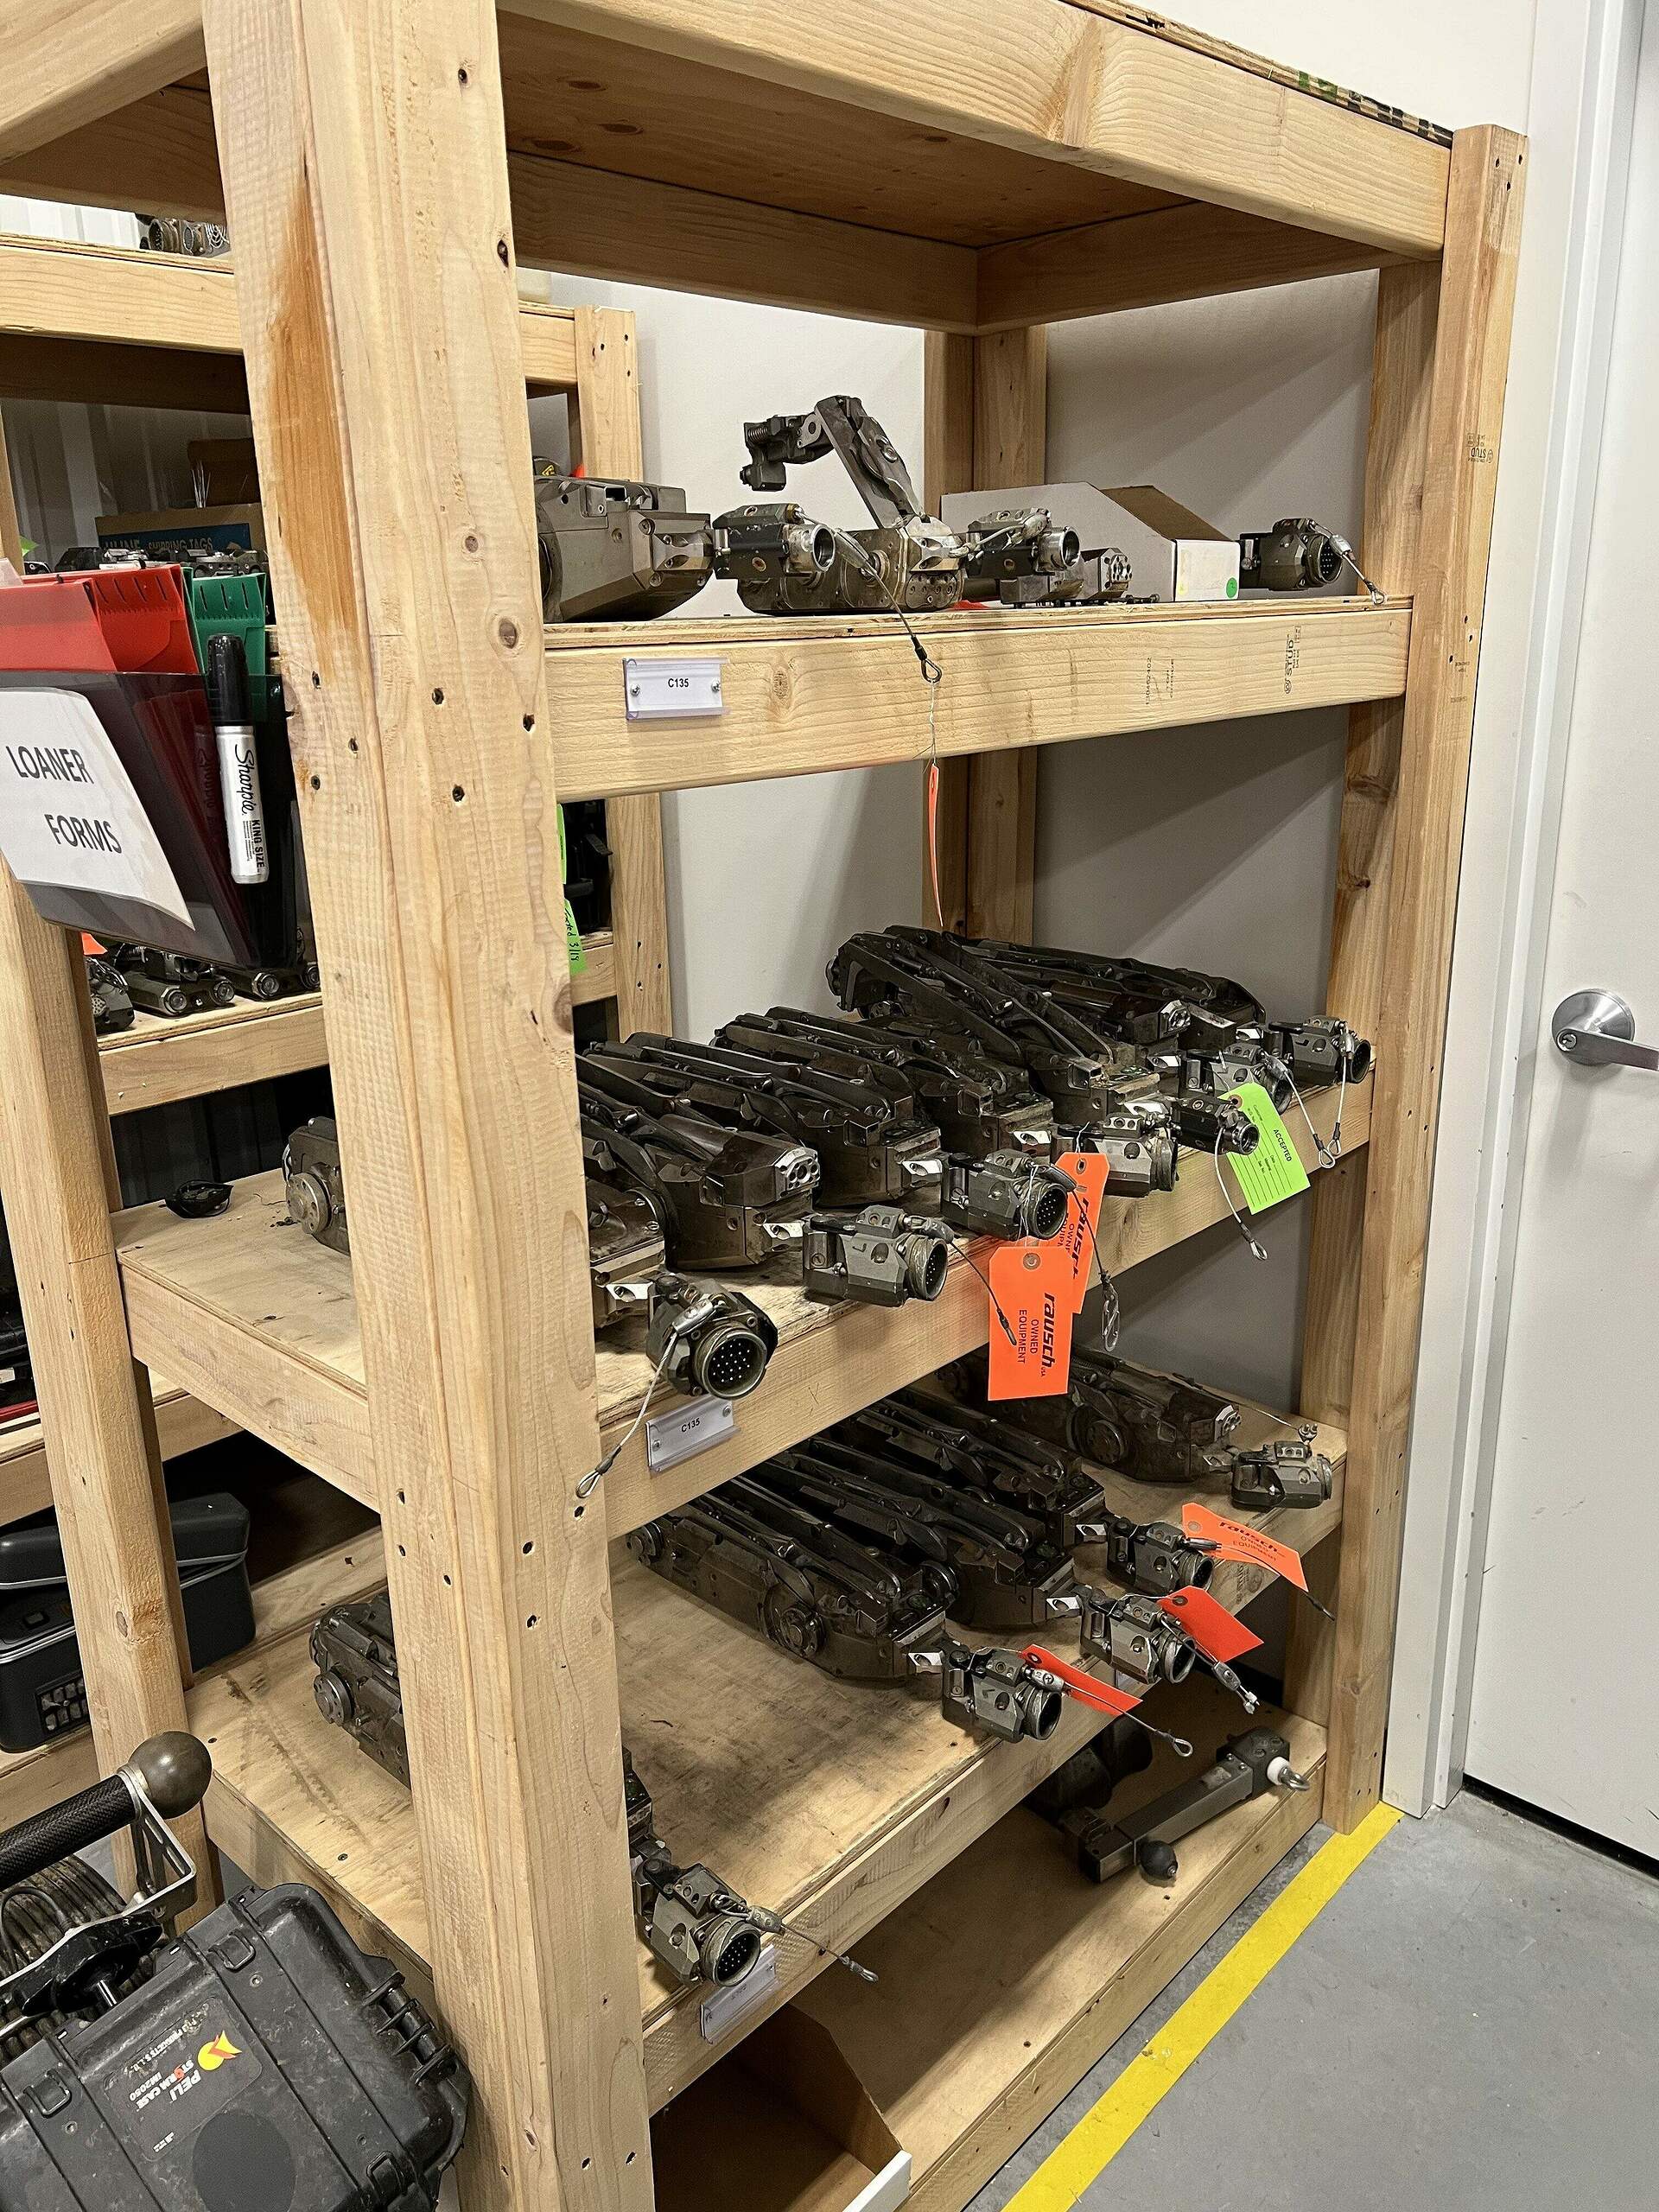 Service and repair items on shelves